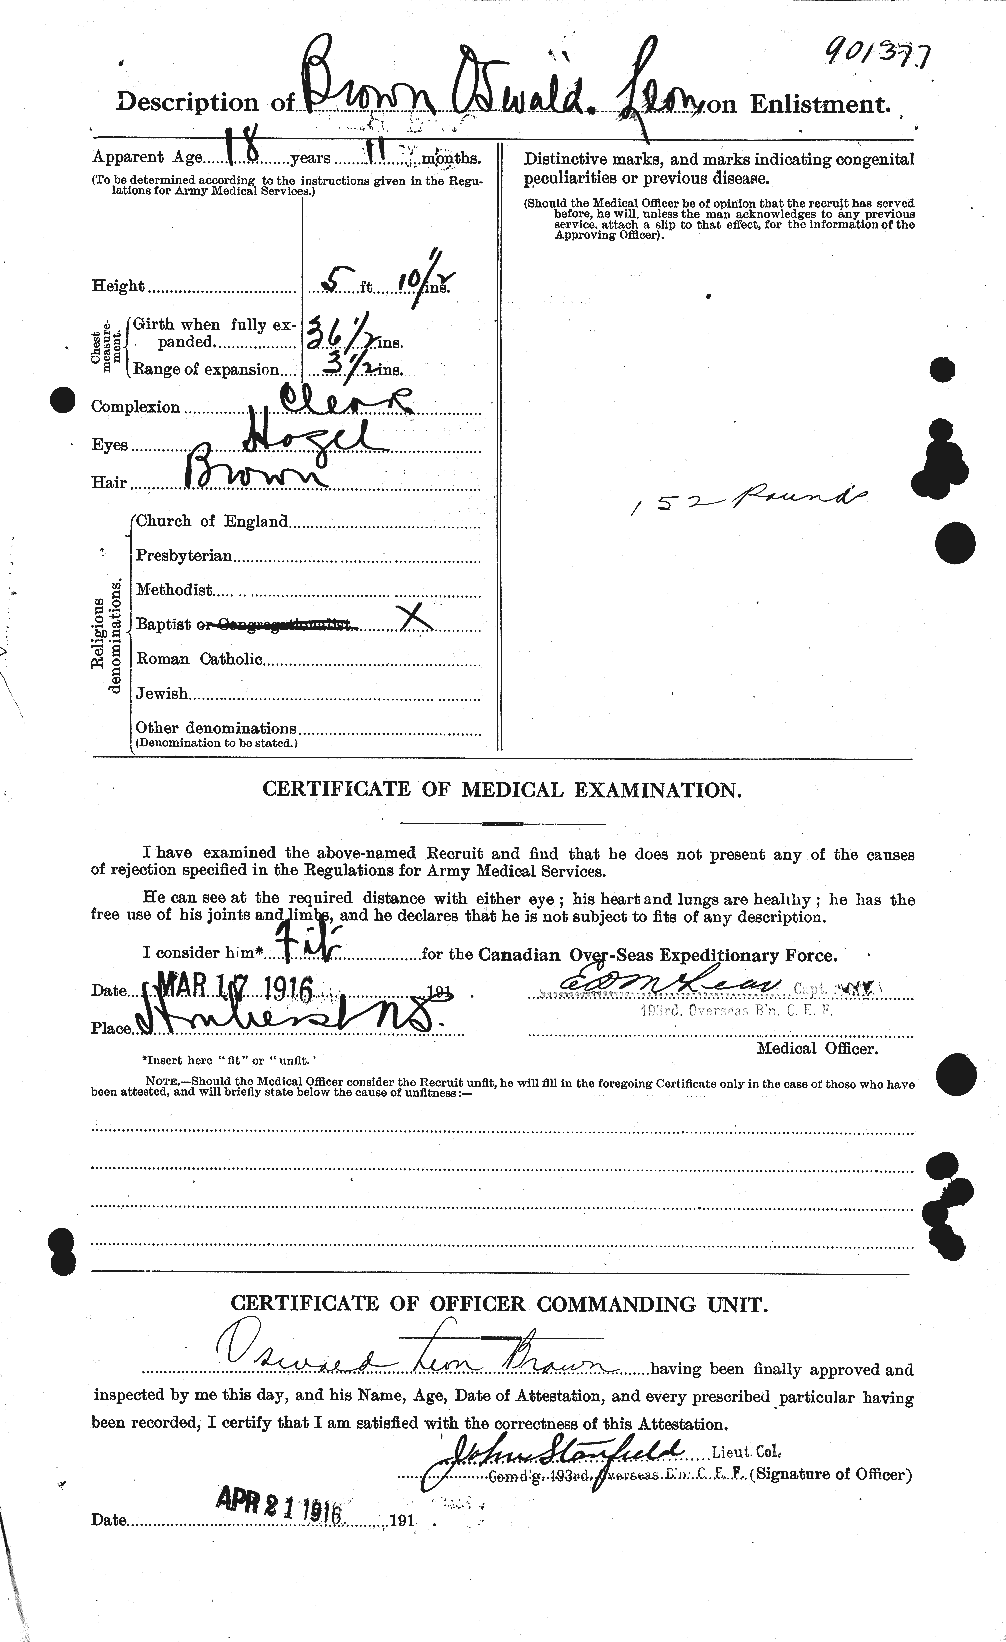 Personnel Records of the First World War - CEF 267143b